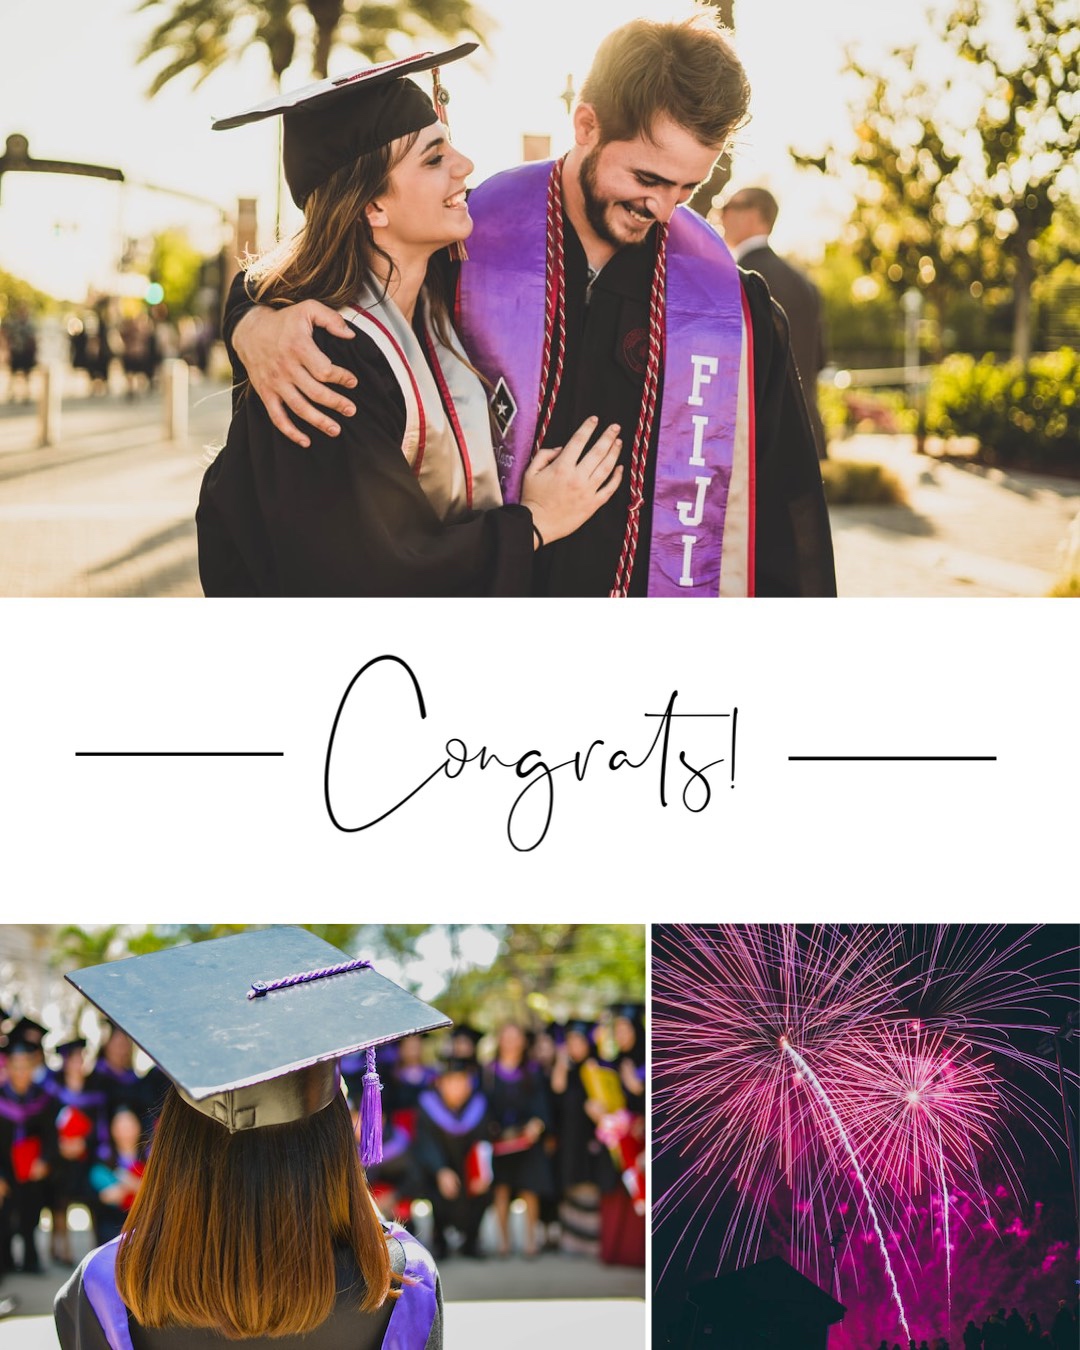 A Collage Of Photos Of Graduates And Fireworks Graduation Template